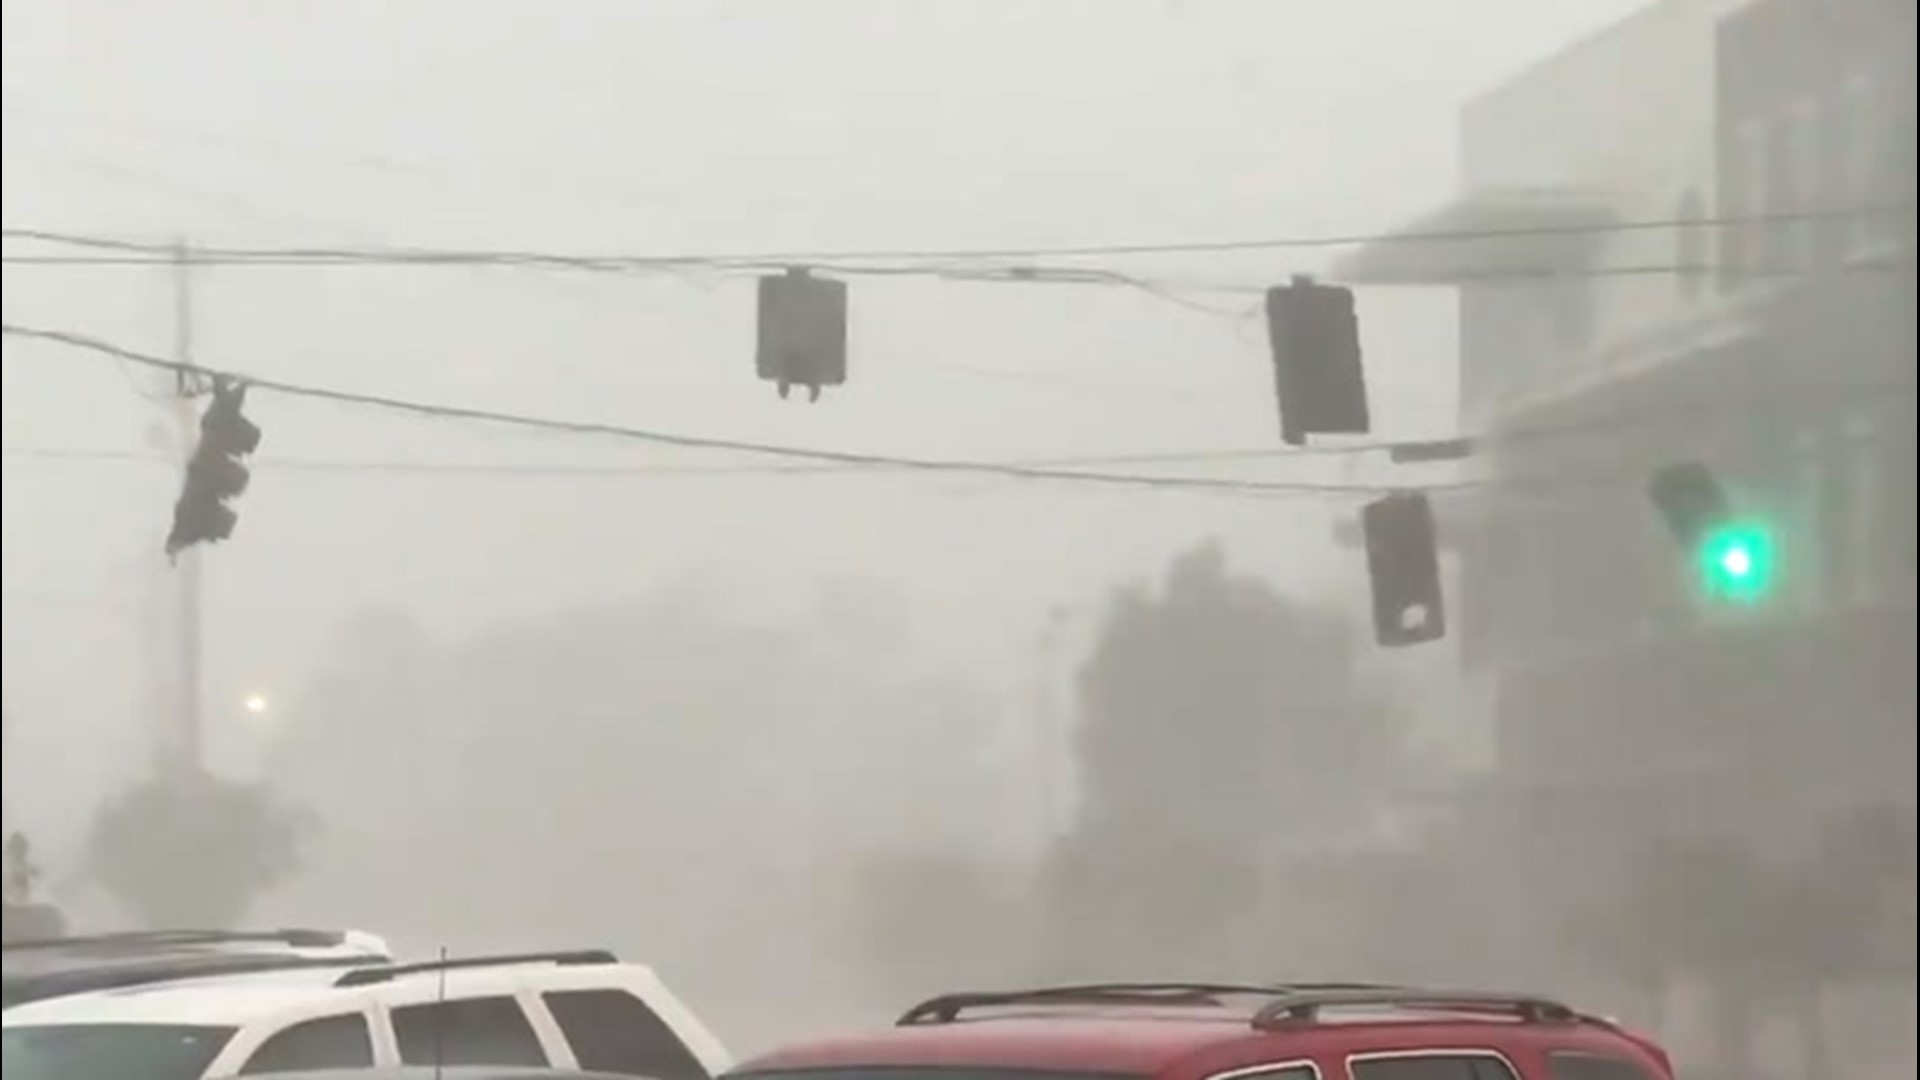 A severe storm swept through Jackson, Mississippi, on May 4. It caused these traffic lights to swing back and forth while motorists underneath braved stormy conditions.